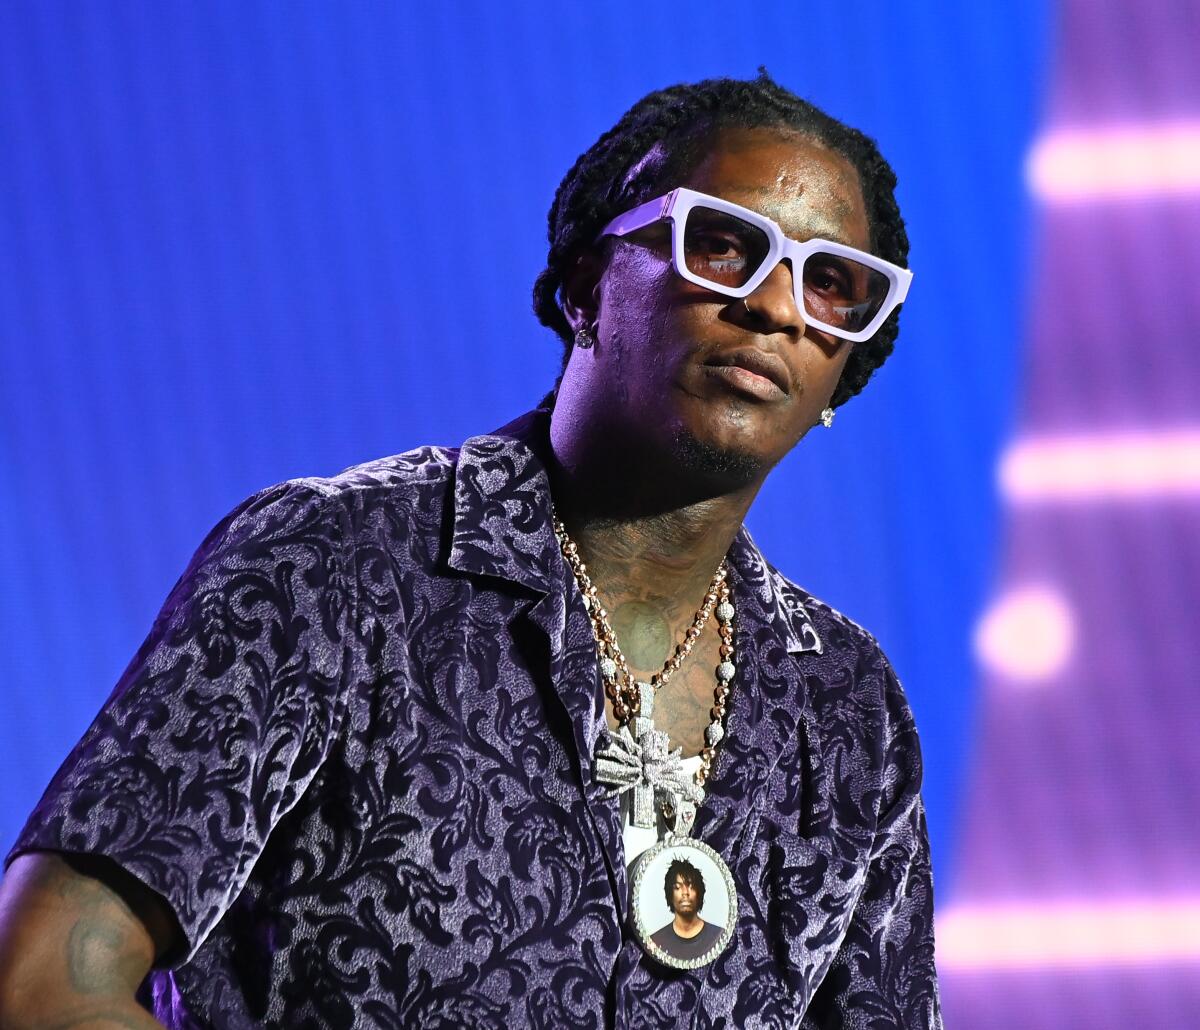 The rapper Young Thug wearing thick, white glasses, a dark patterned shirt and chains leaning forward and looking ahead